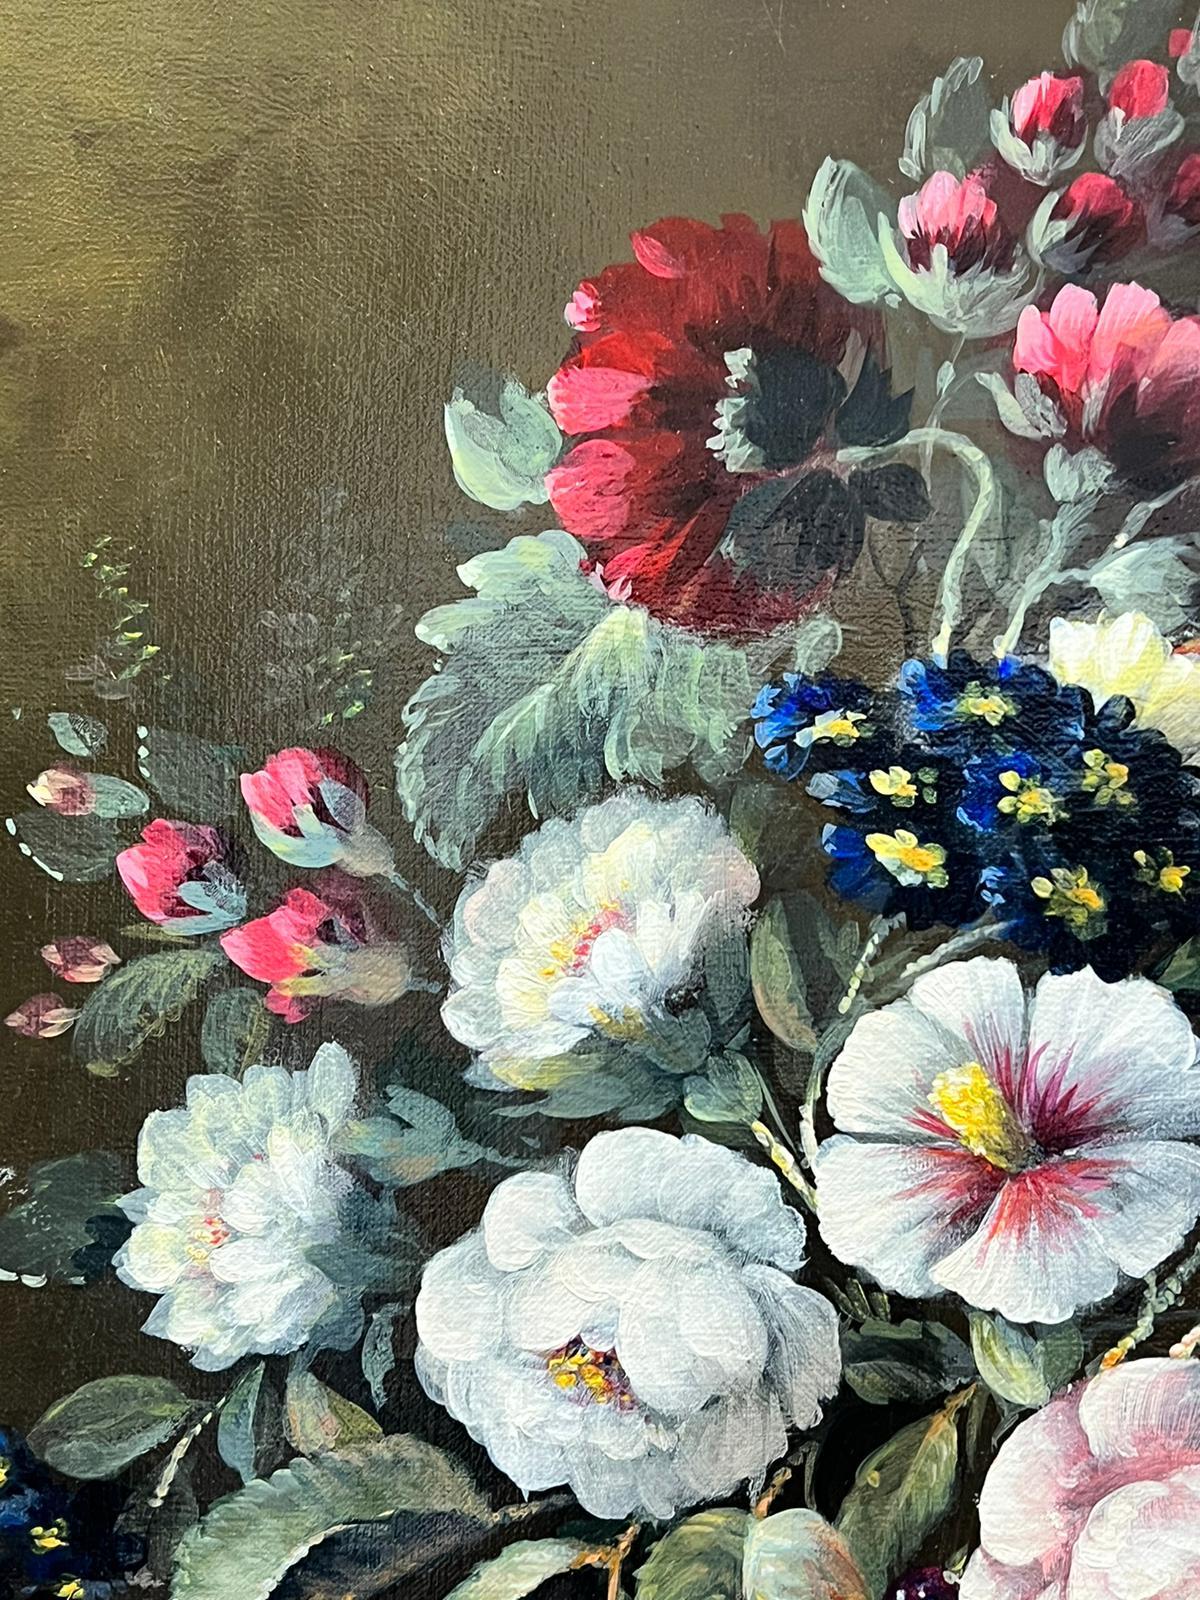 Thomas Heesakkers, Dutch b.1946
Flowers in a vase with fruit on 
oil painting on canvas, framed
framed: 32 x 27 inches
canvas: 24 x 19.5 inches
provenance: private collection, UK
condition: very good and sound condition 
